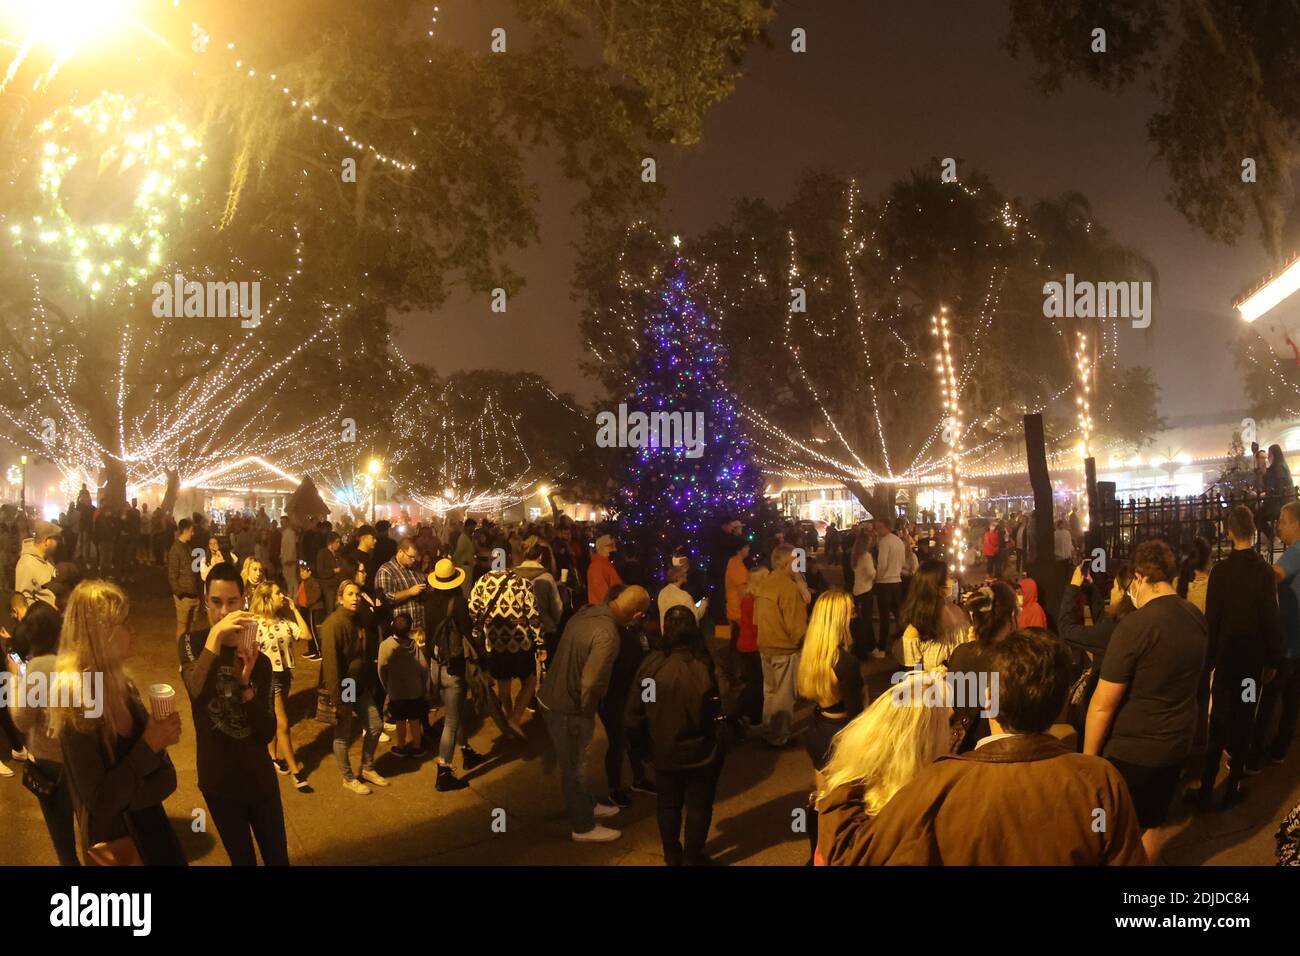 St. Augustine, FL, USA. 13th Dec, 2020. View of maskless visitors at the 27th Annual Night Of Lights in St. Augustin, Florida on December 13, 2020. Credit: Mpi34/Media Punch/Alamy Live News Stock Photo